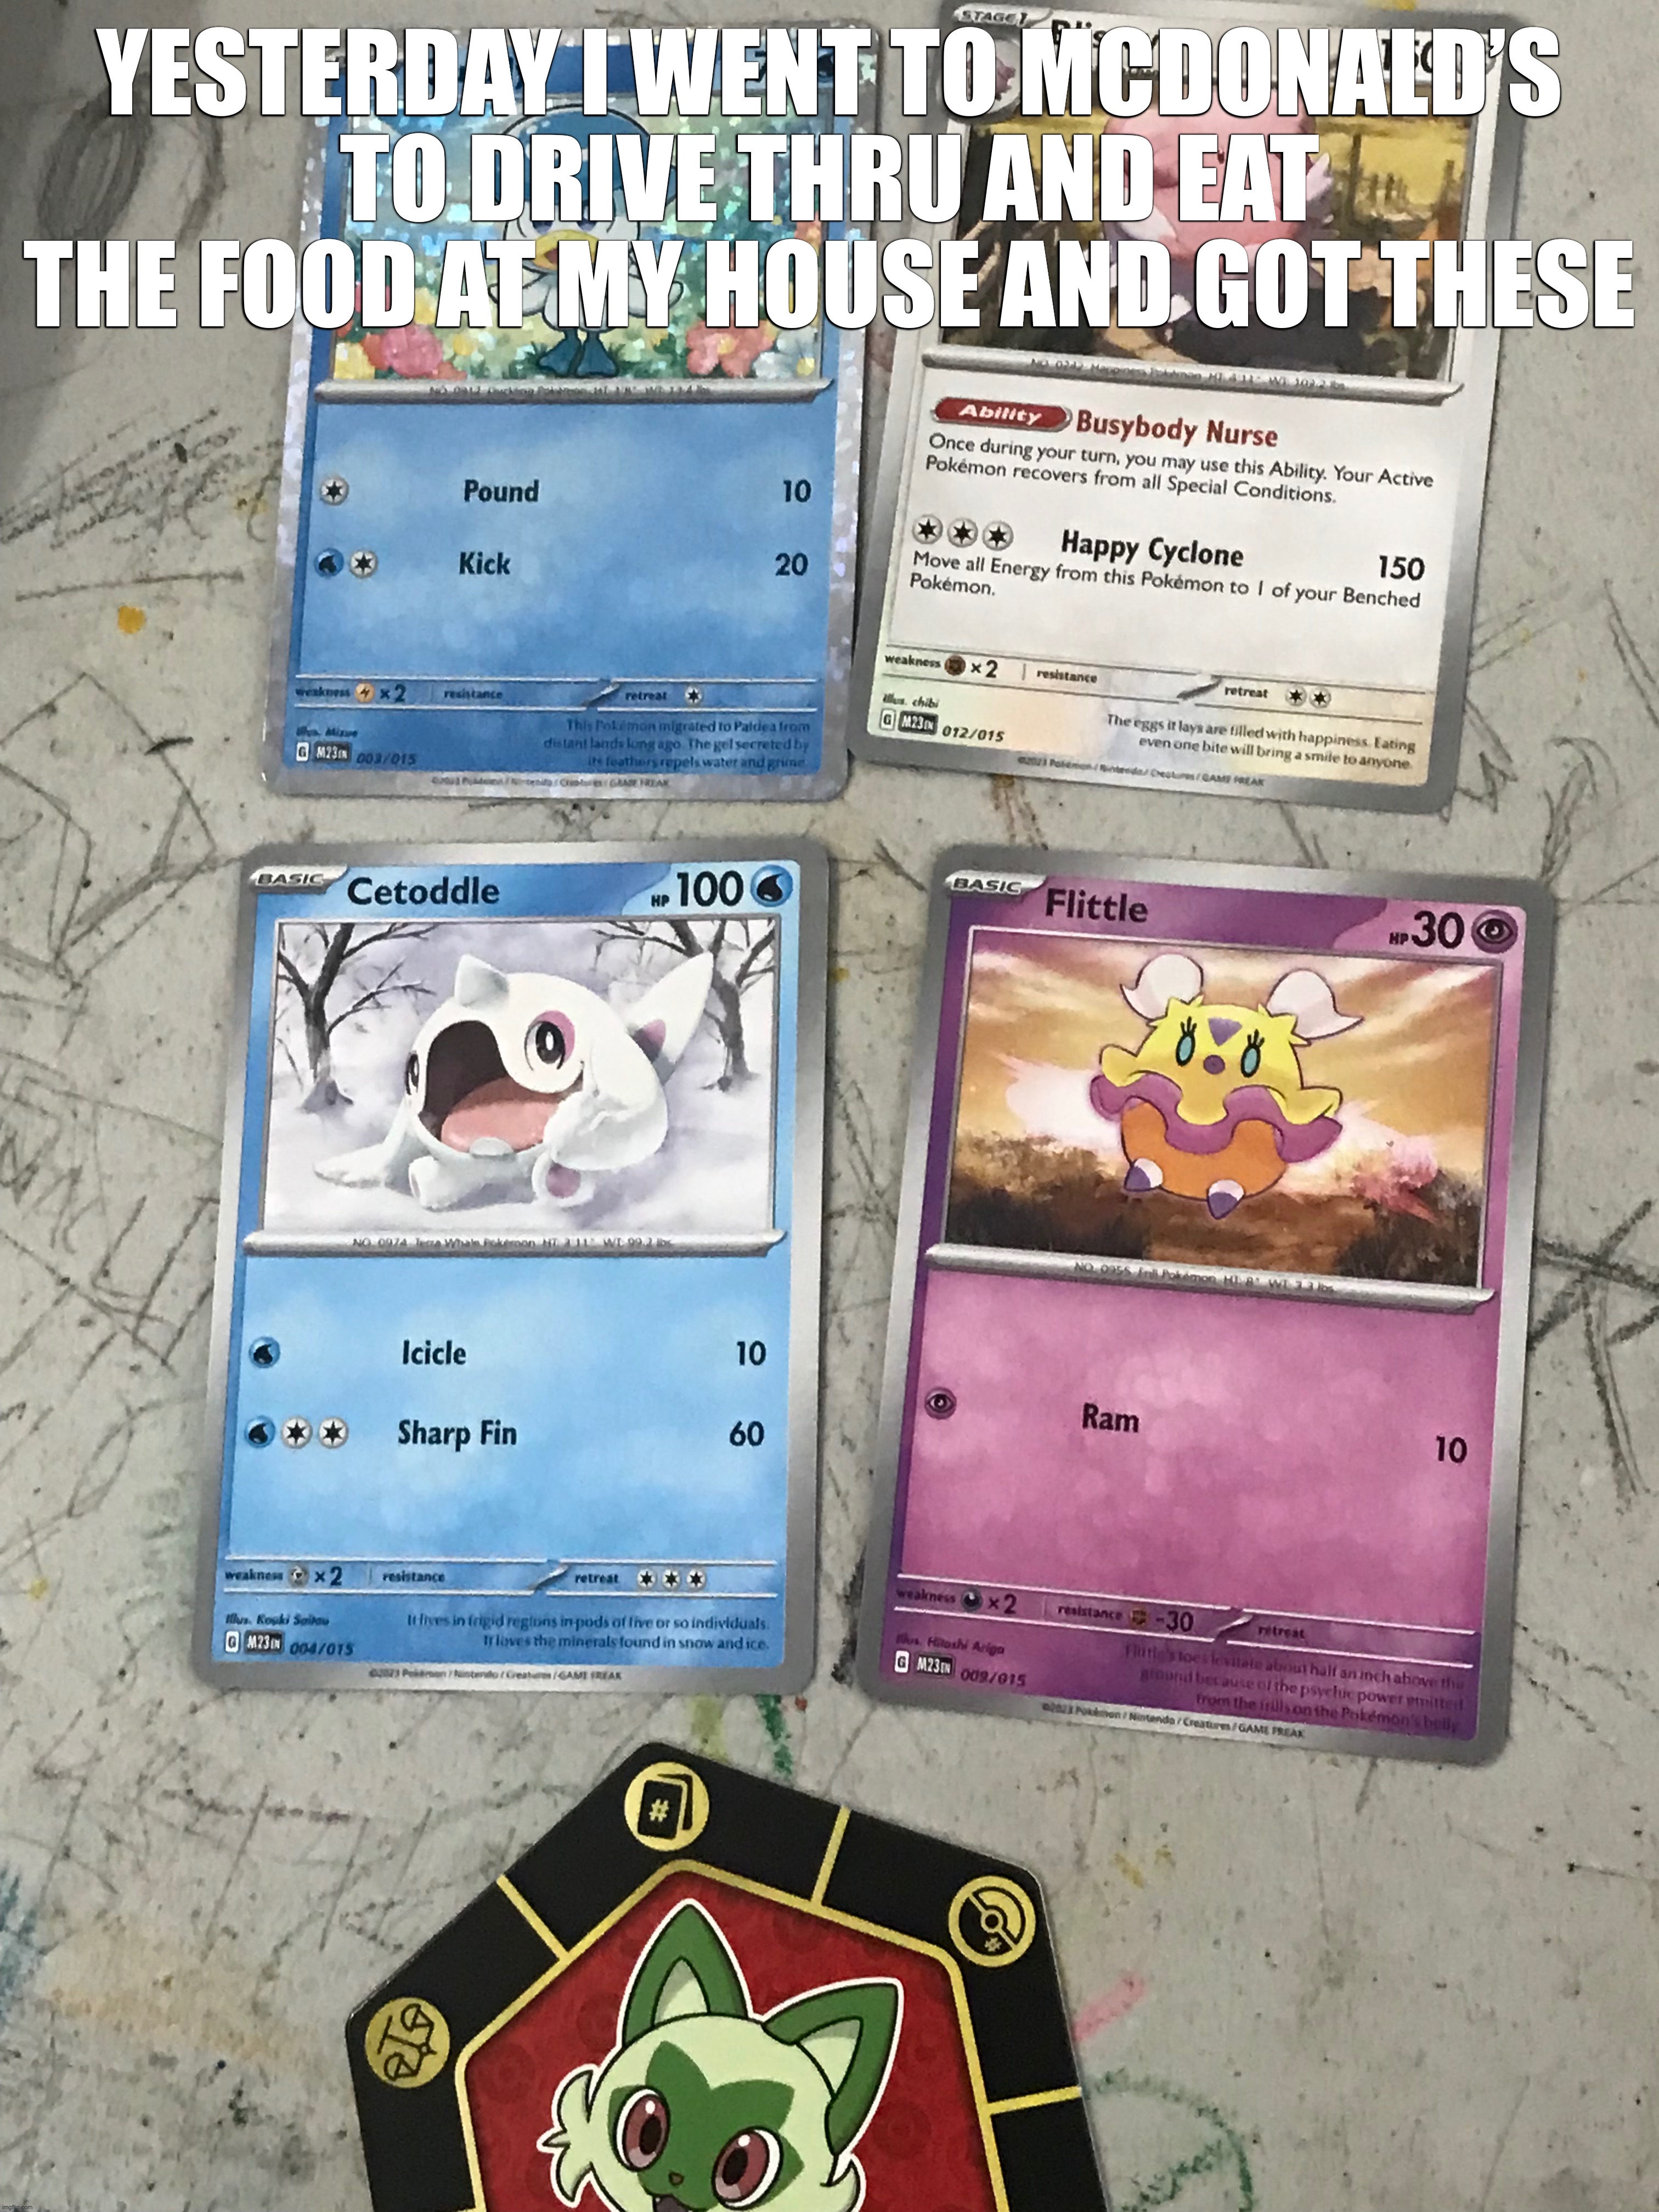 YESTERDAY I WENT TO MCDONALD’S TO DRIVE THRU AND EAT THE FOOD AT MY HOUSE AND GOT THESE | image tagged in pokemon,card,mcdonalds | made w/ Imgflip meme maker